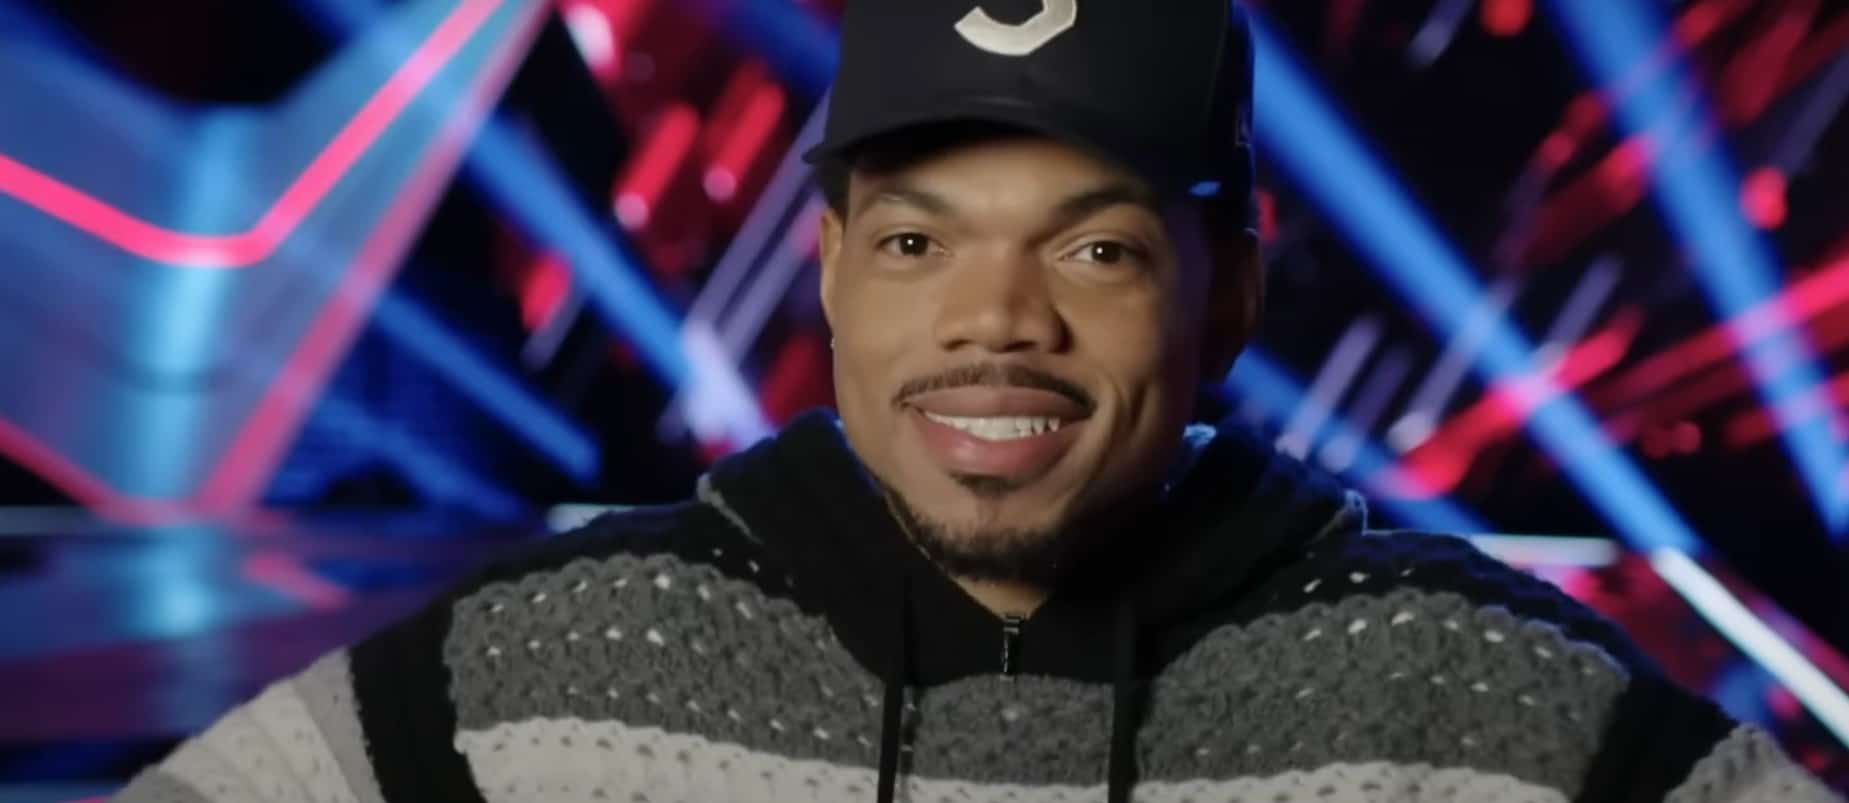 Who is Chance on The Voice?